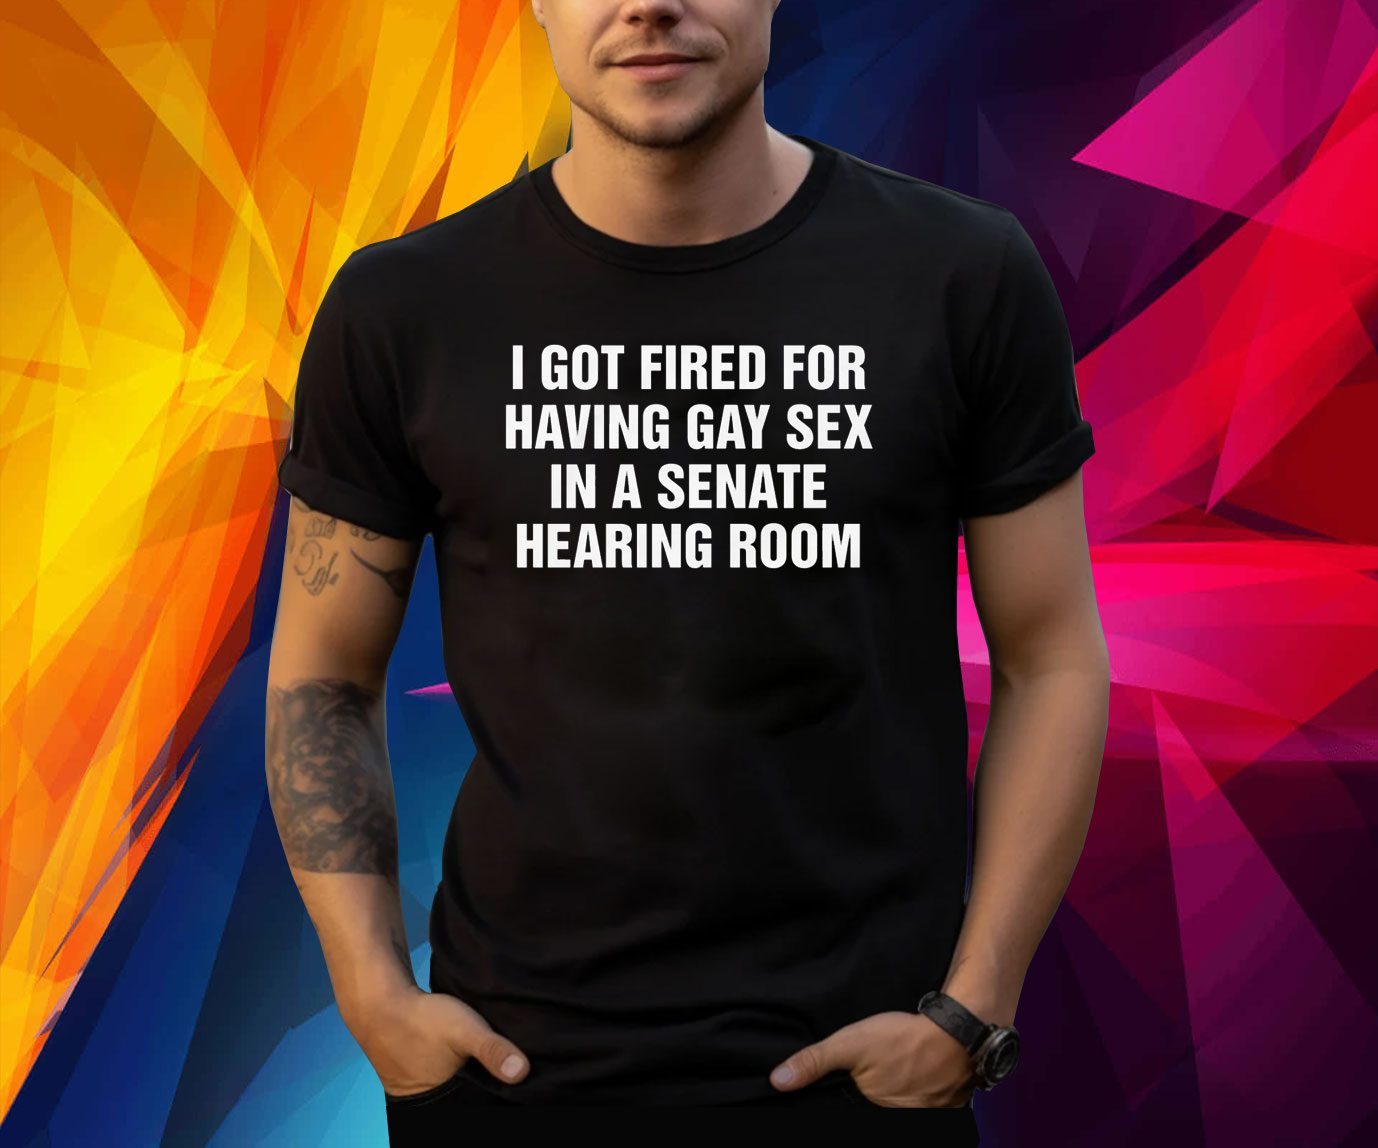 I Got Fired For Having Gay Sex In A Senate Hearing Room Shirt